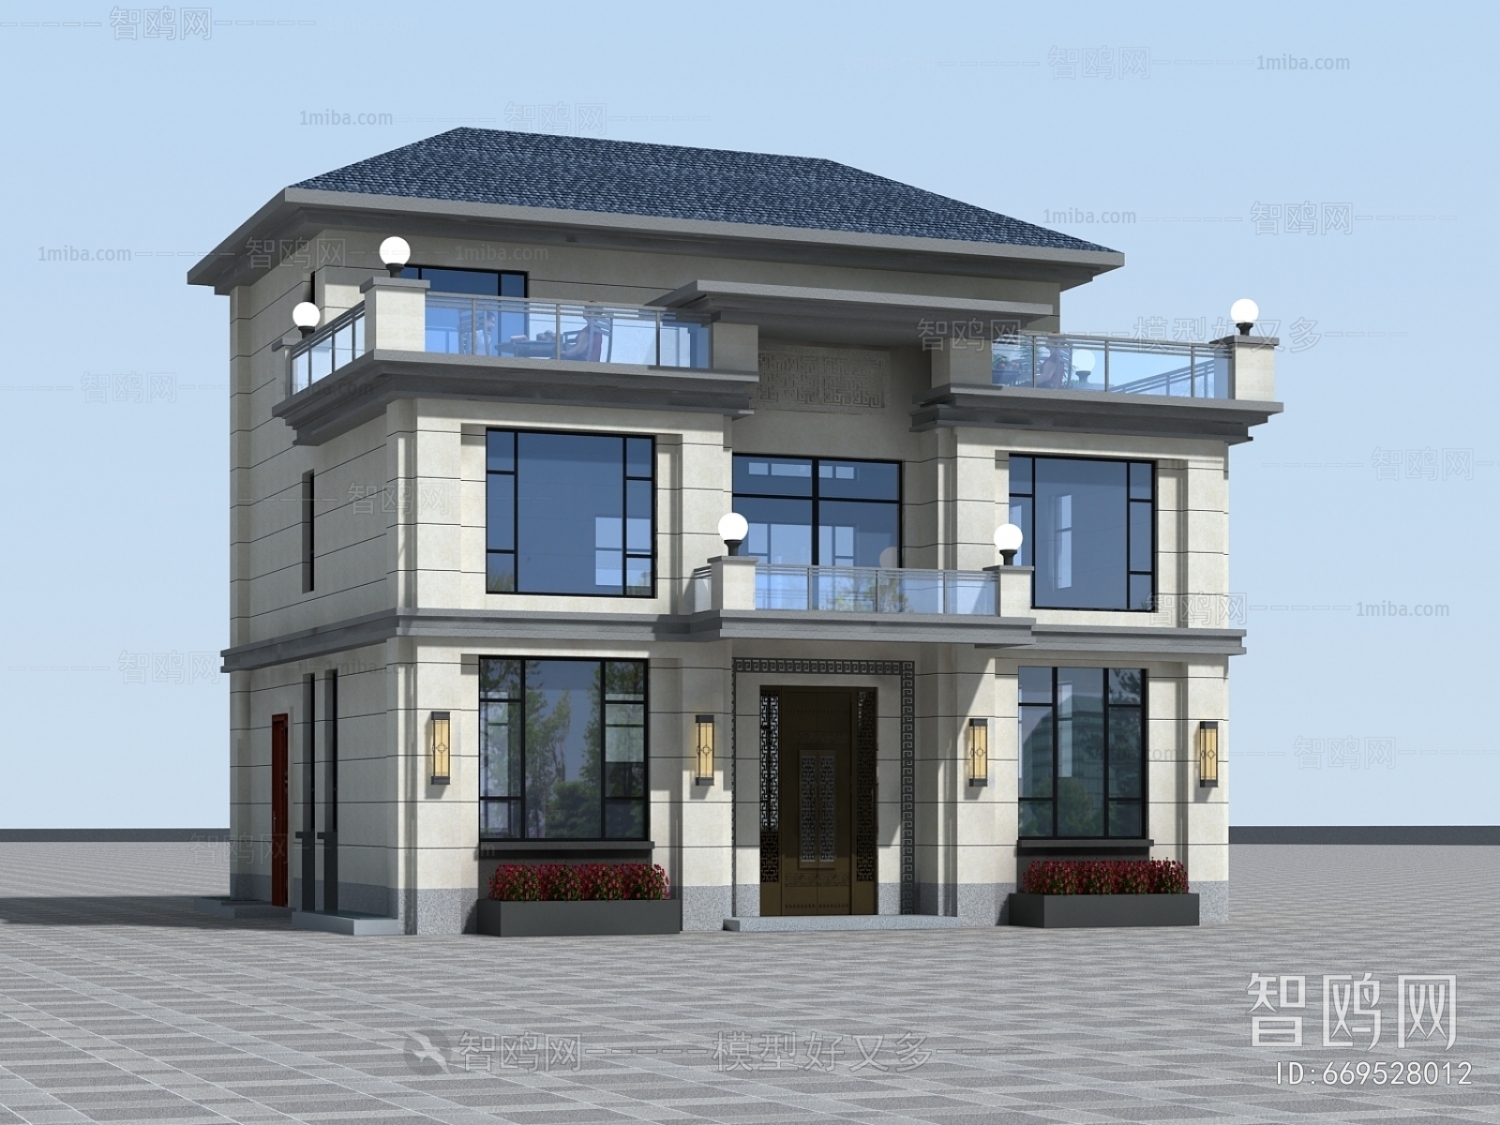 New Chinese Style Detached Villa